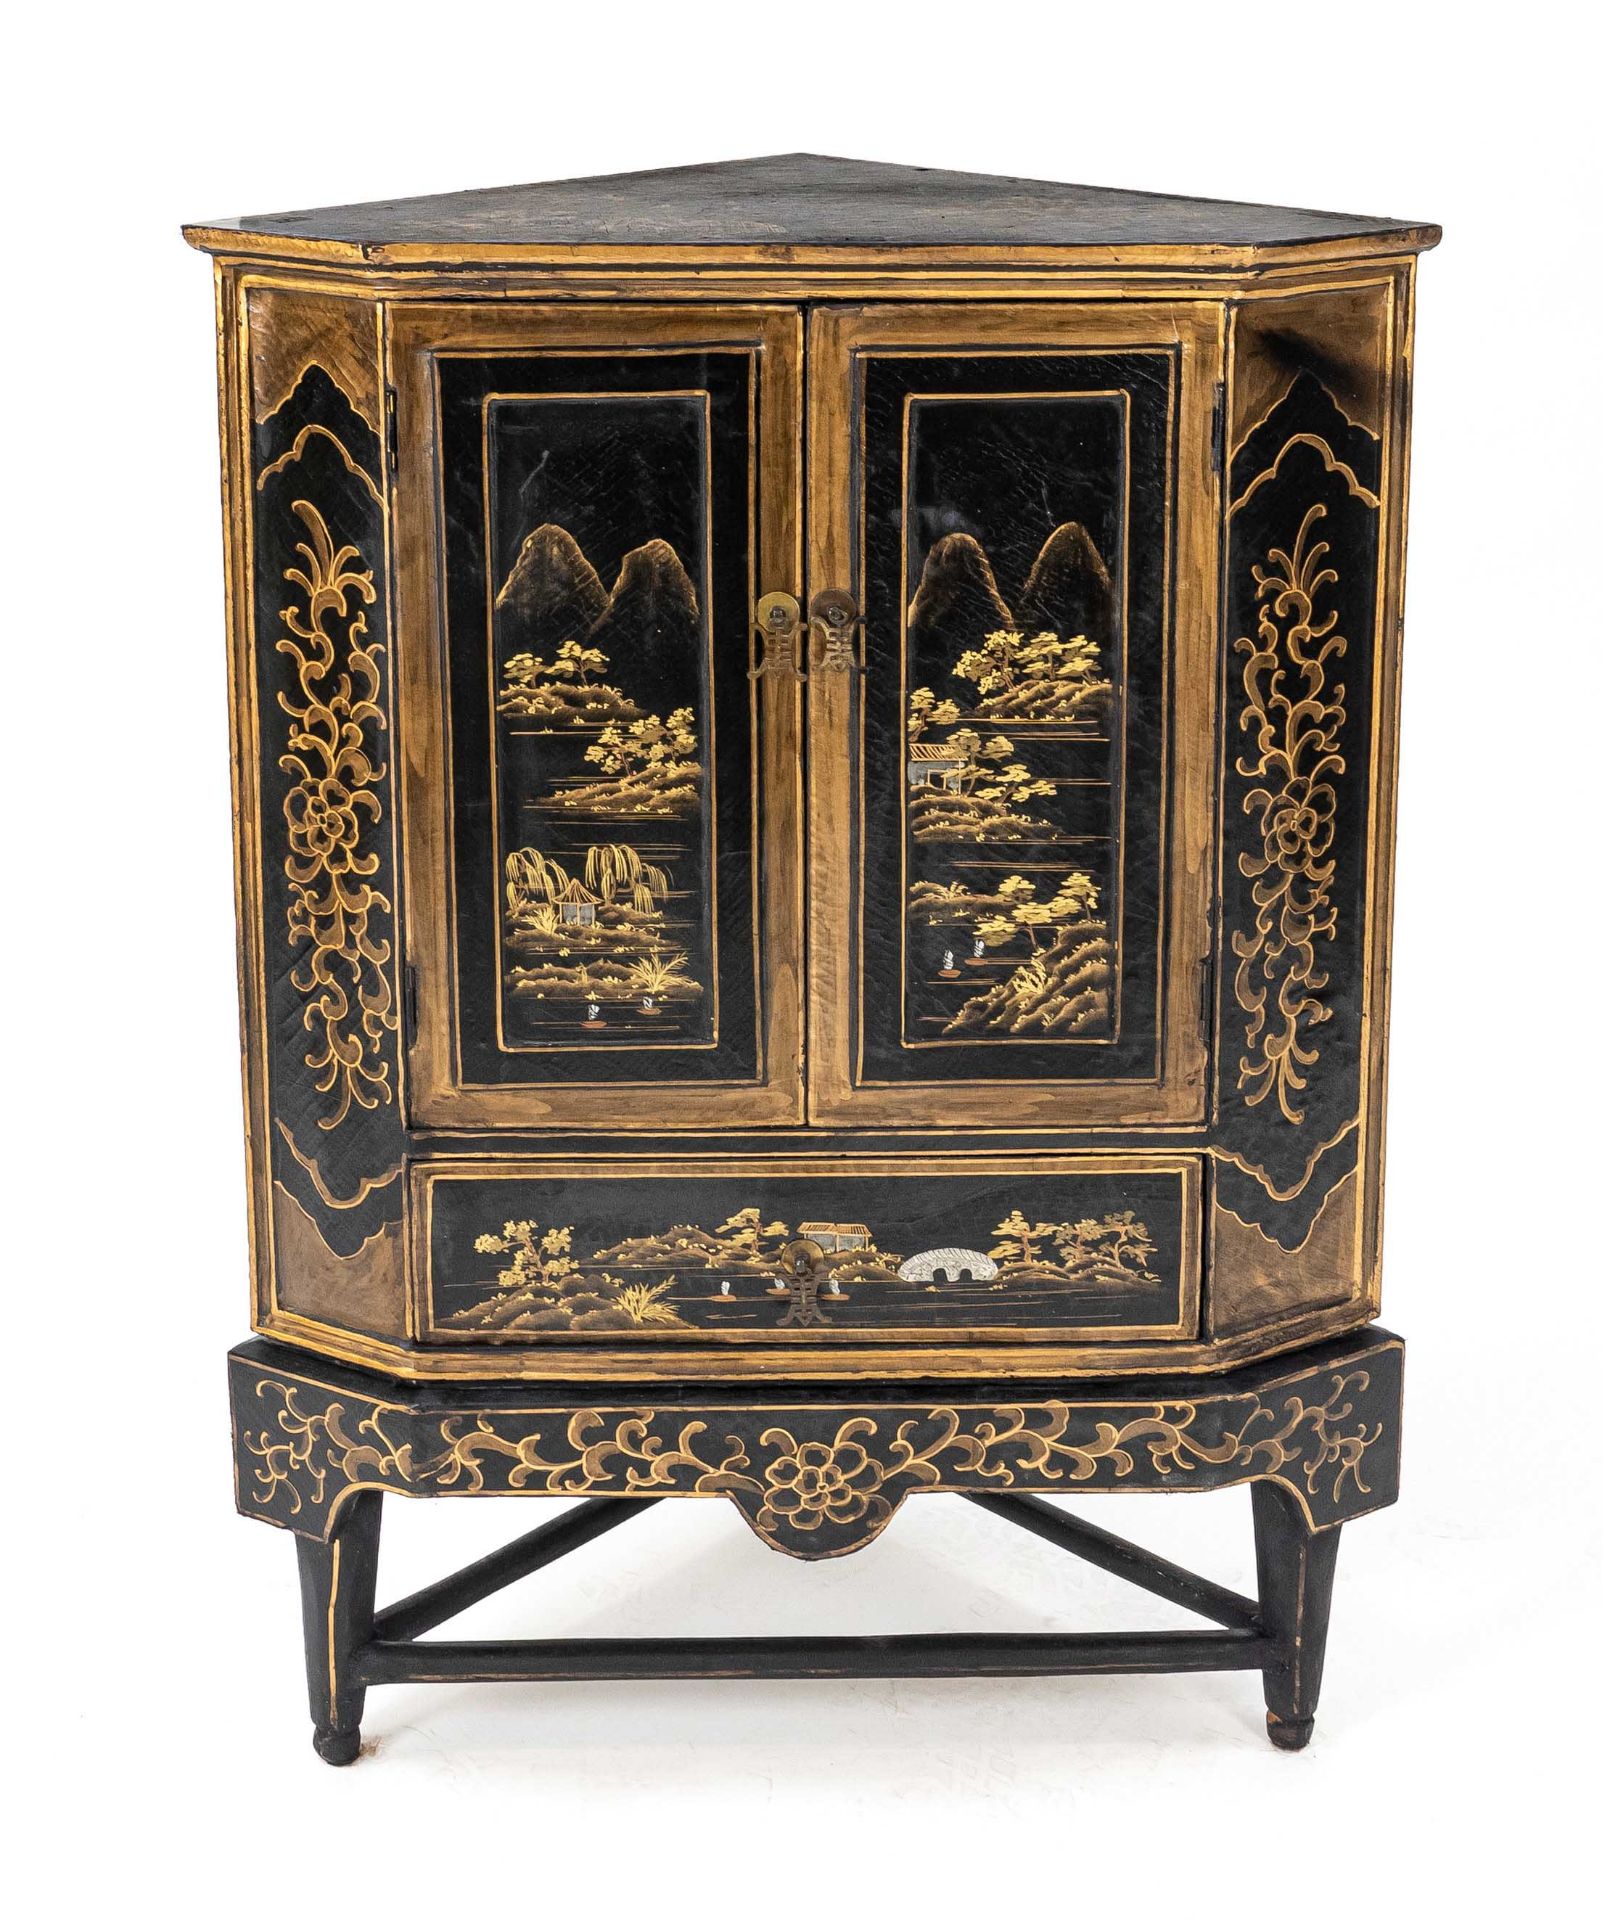 Asian style corner cupboard, 20th century, wood with painting typical for the country, 106x74x45cm